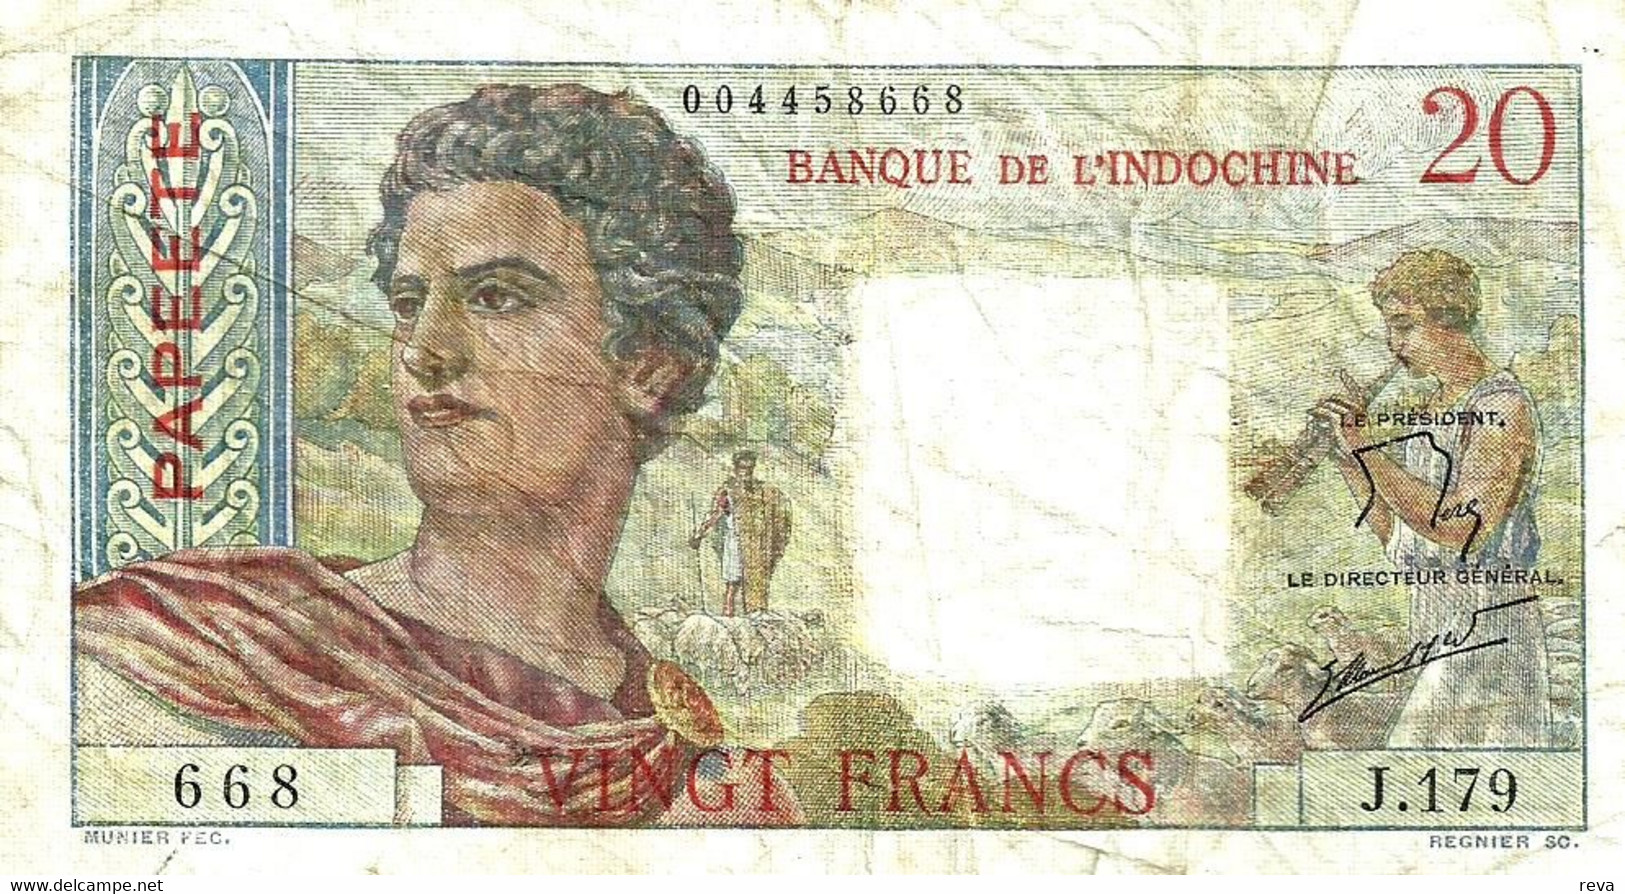 FRENCH POLYNESIA 20 FRANCS GREY MAN HEAD FRONT WOMAN BACK NOT DATED(1963) P21c 3RD SIG VARIETY F+ READ DESCRIPTION!! - Papeete (Polinesia Francese 1914-1985)